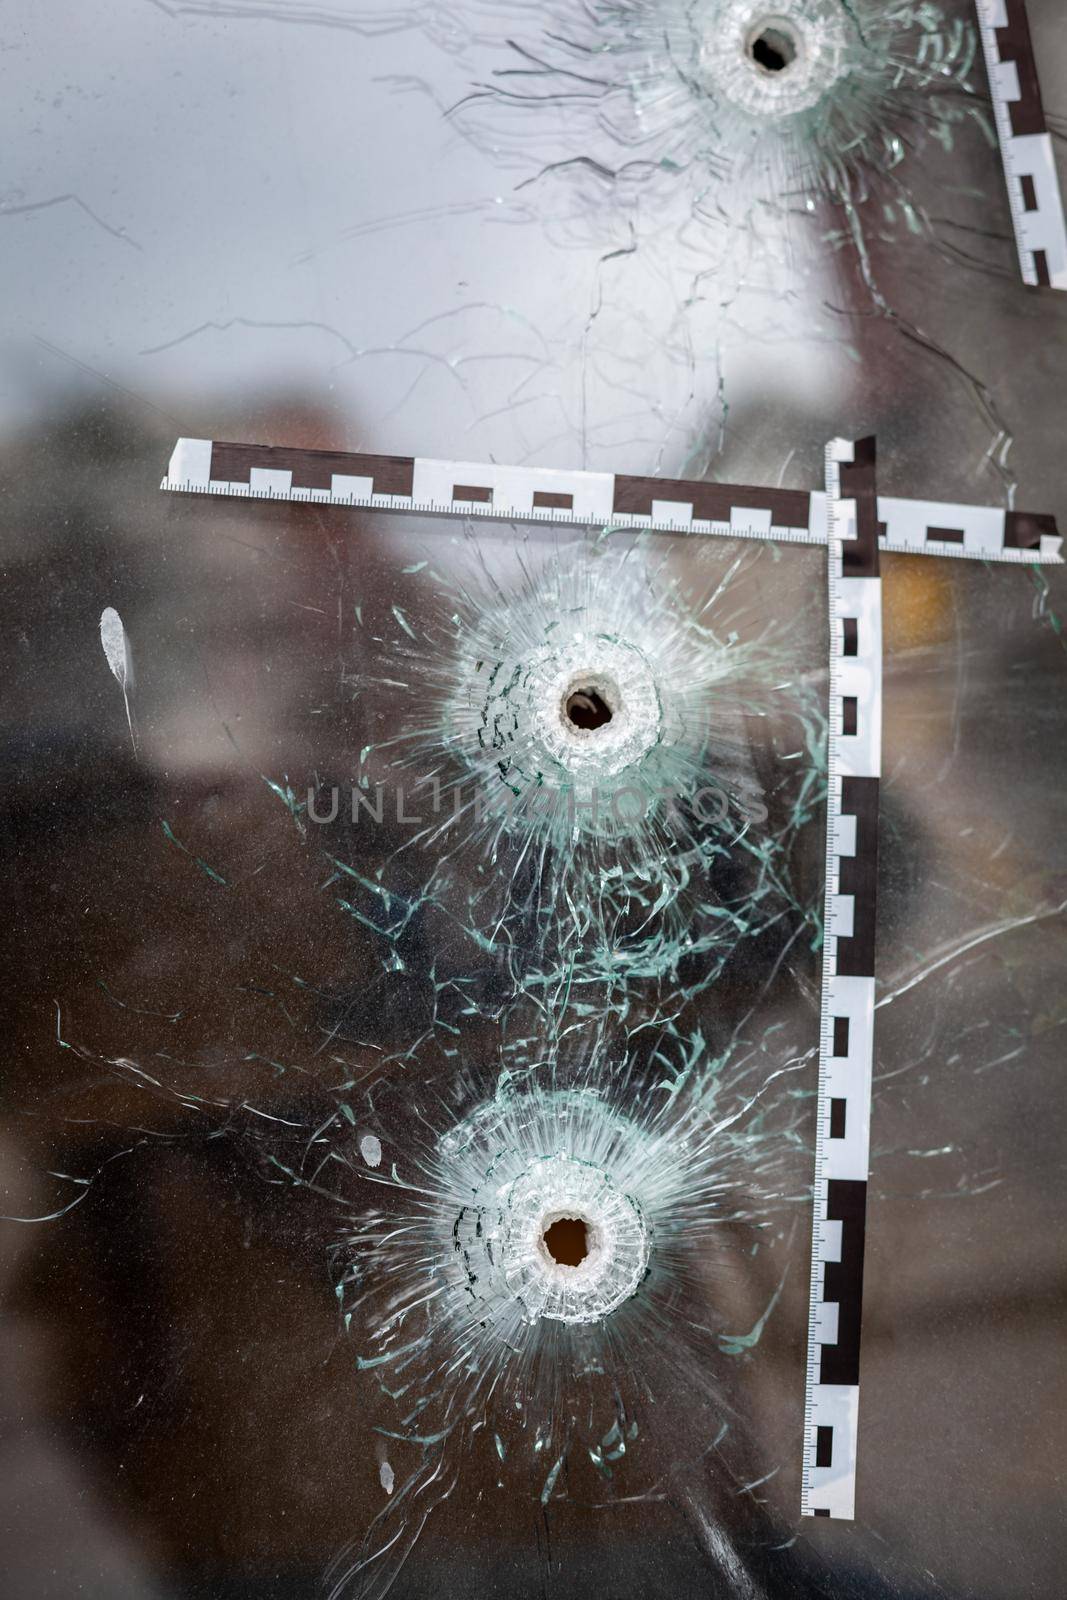 bullet holes in a glass shop window marked with a police tape.